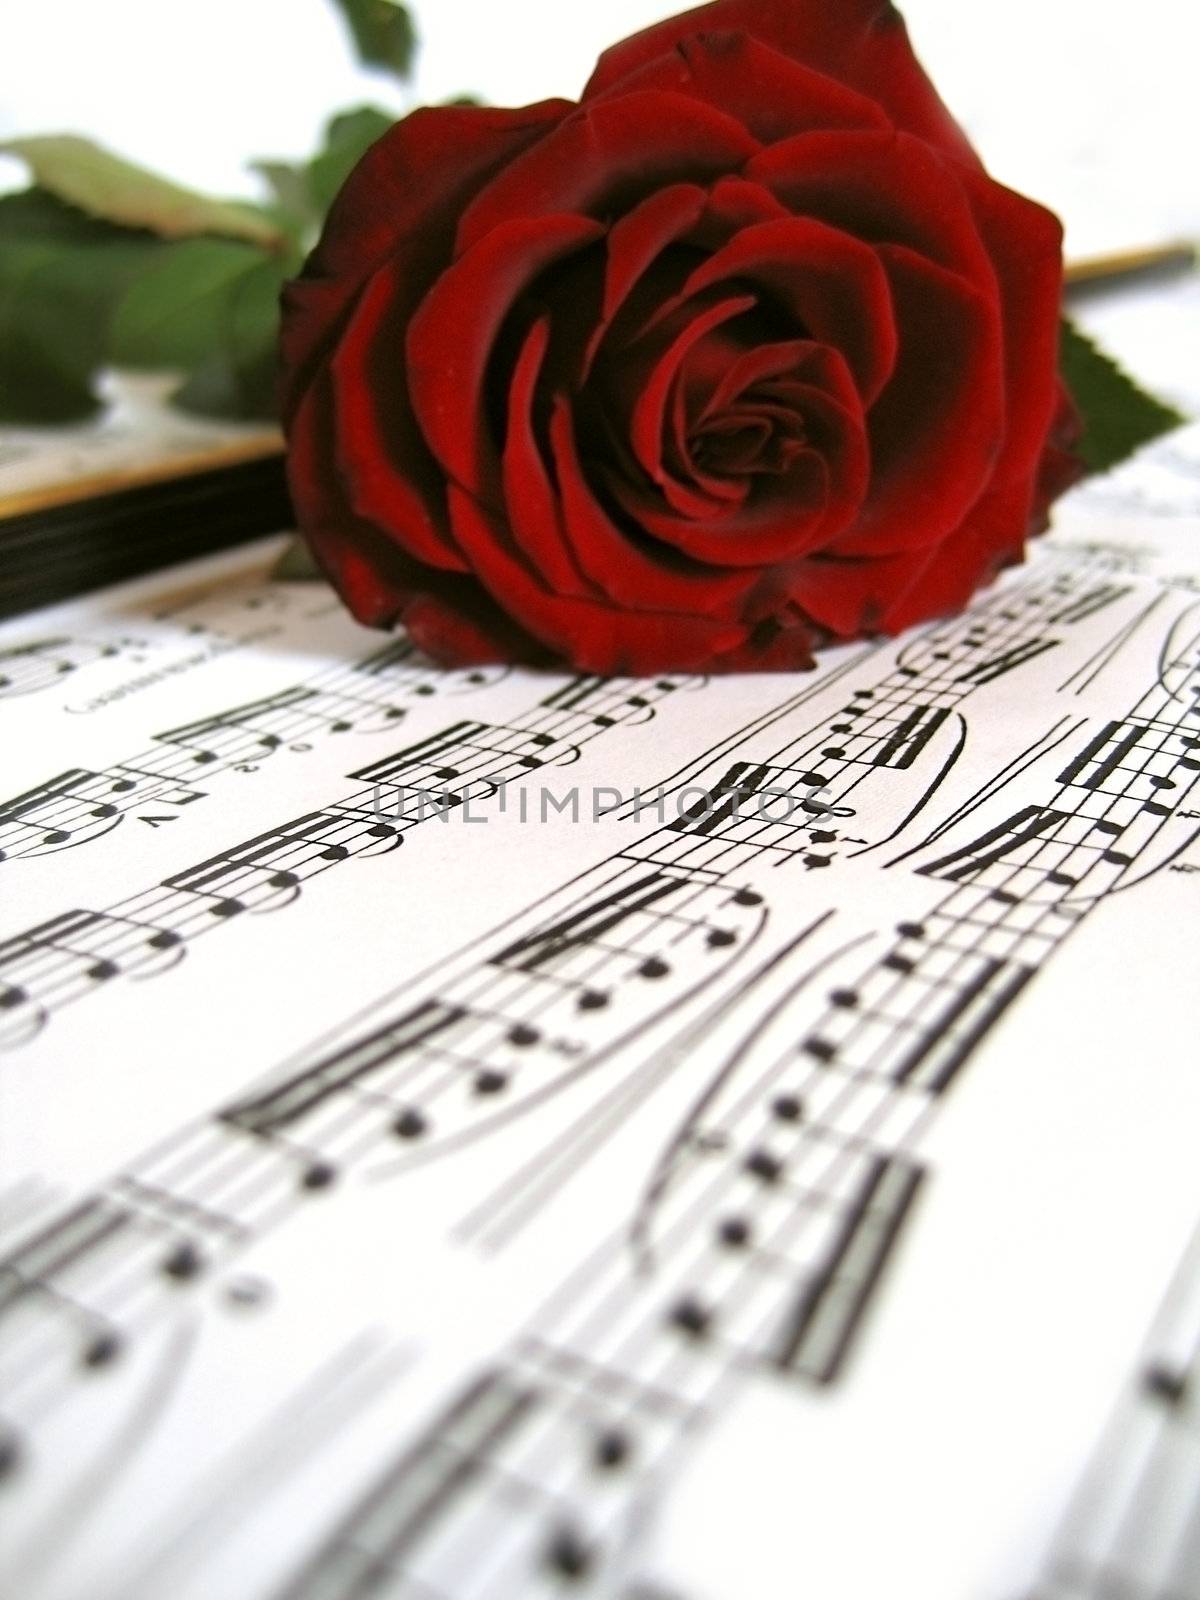 Red rose over sheet music